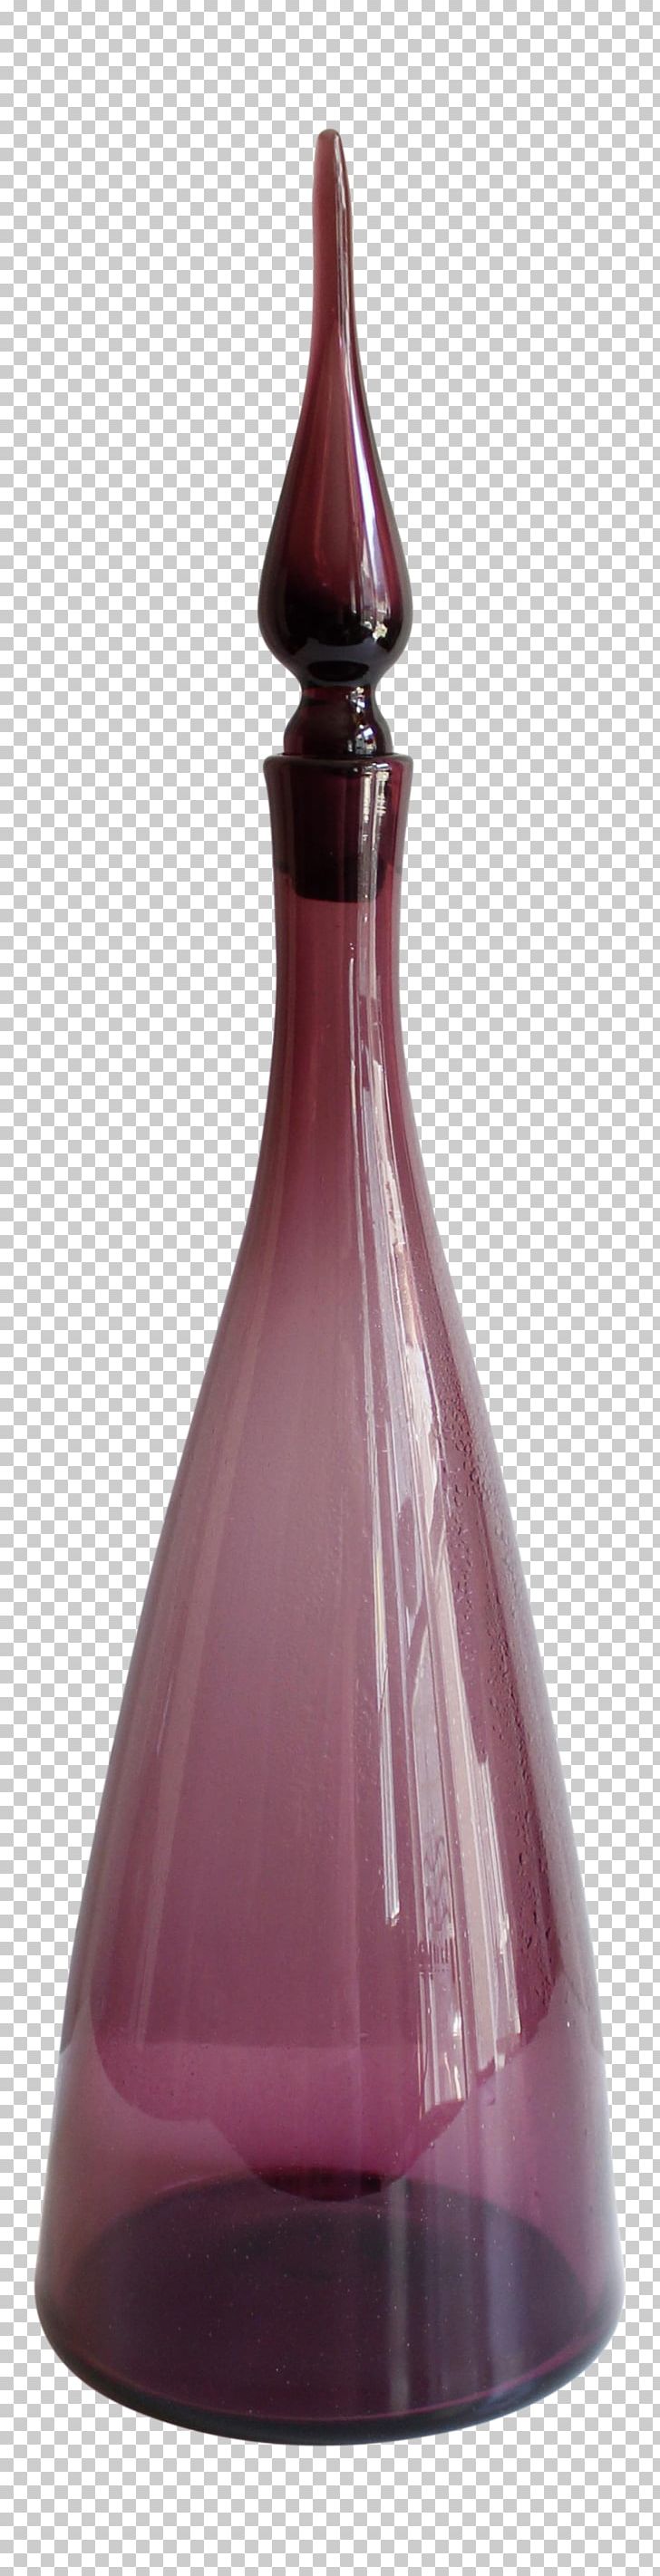 Glass Bottle PNG, Clipart, Barware, Bottle, Decanter, Flame, Glass Free PNG Download